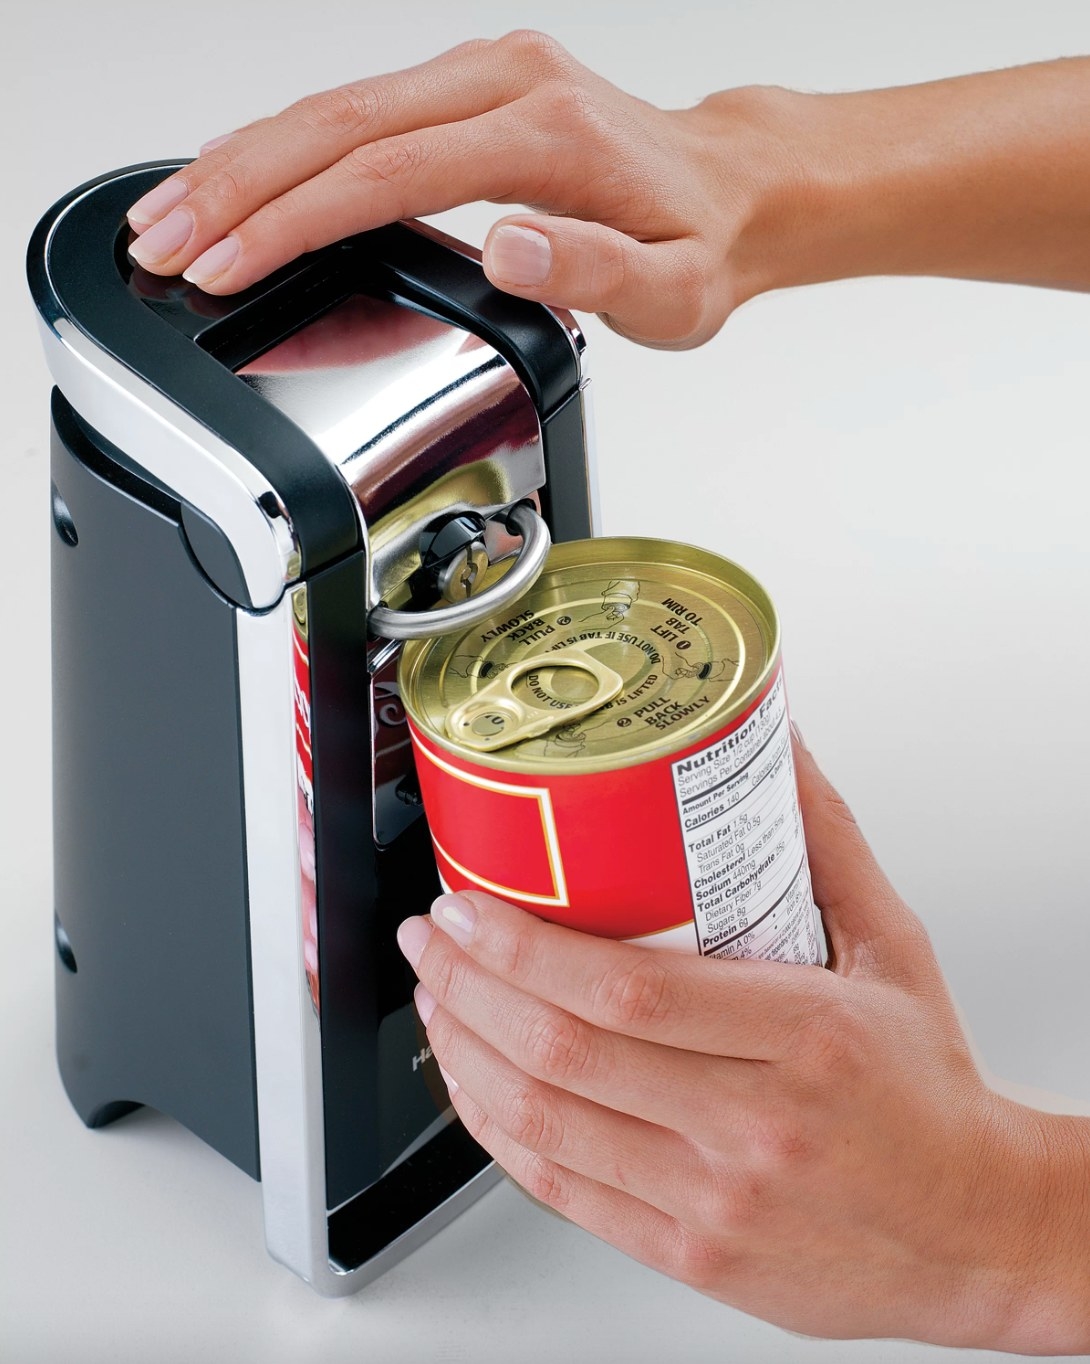 a model using the black electric can opener to open a red can